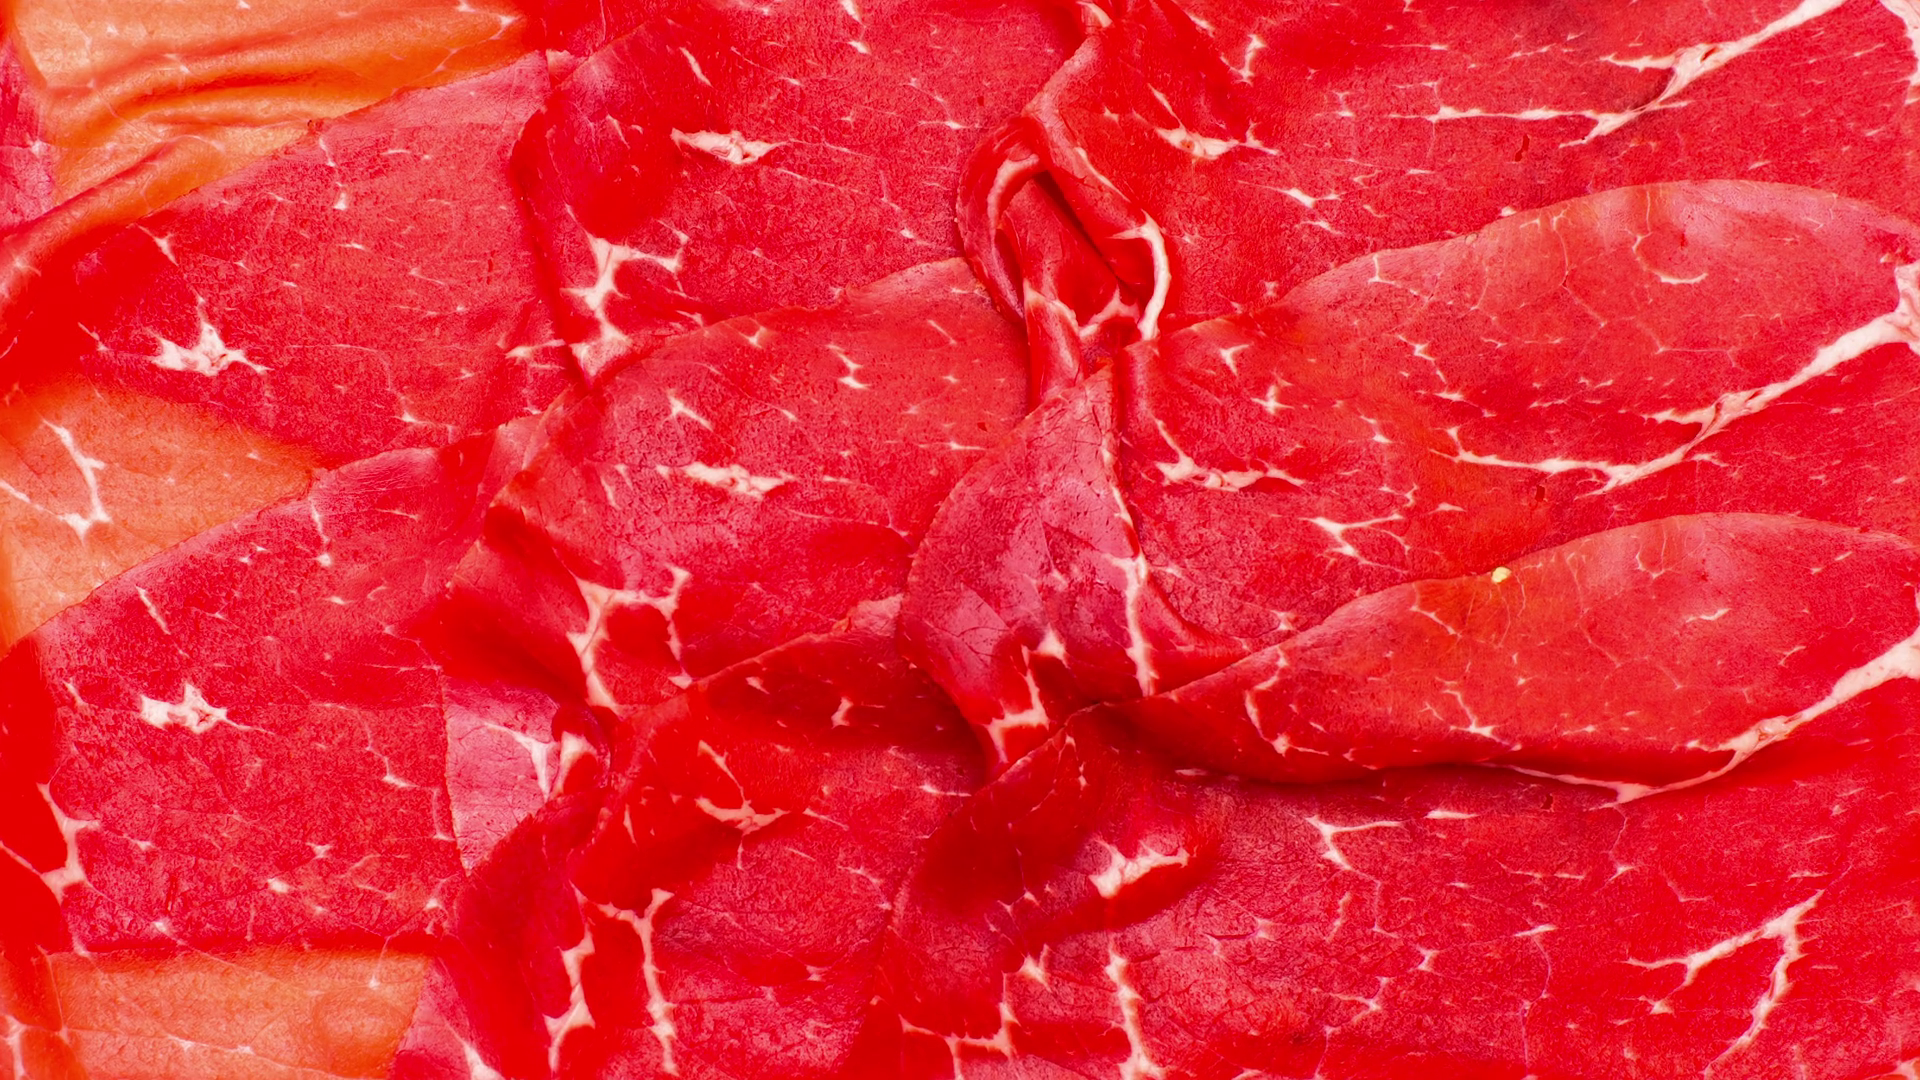 Bresaola slices red meat background texture still image zoom in ...